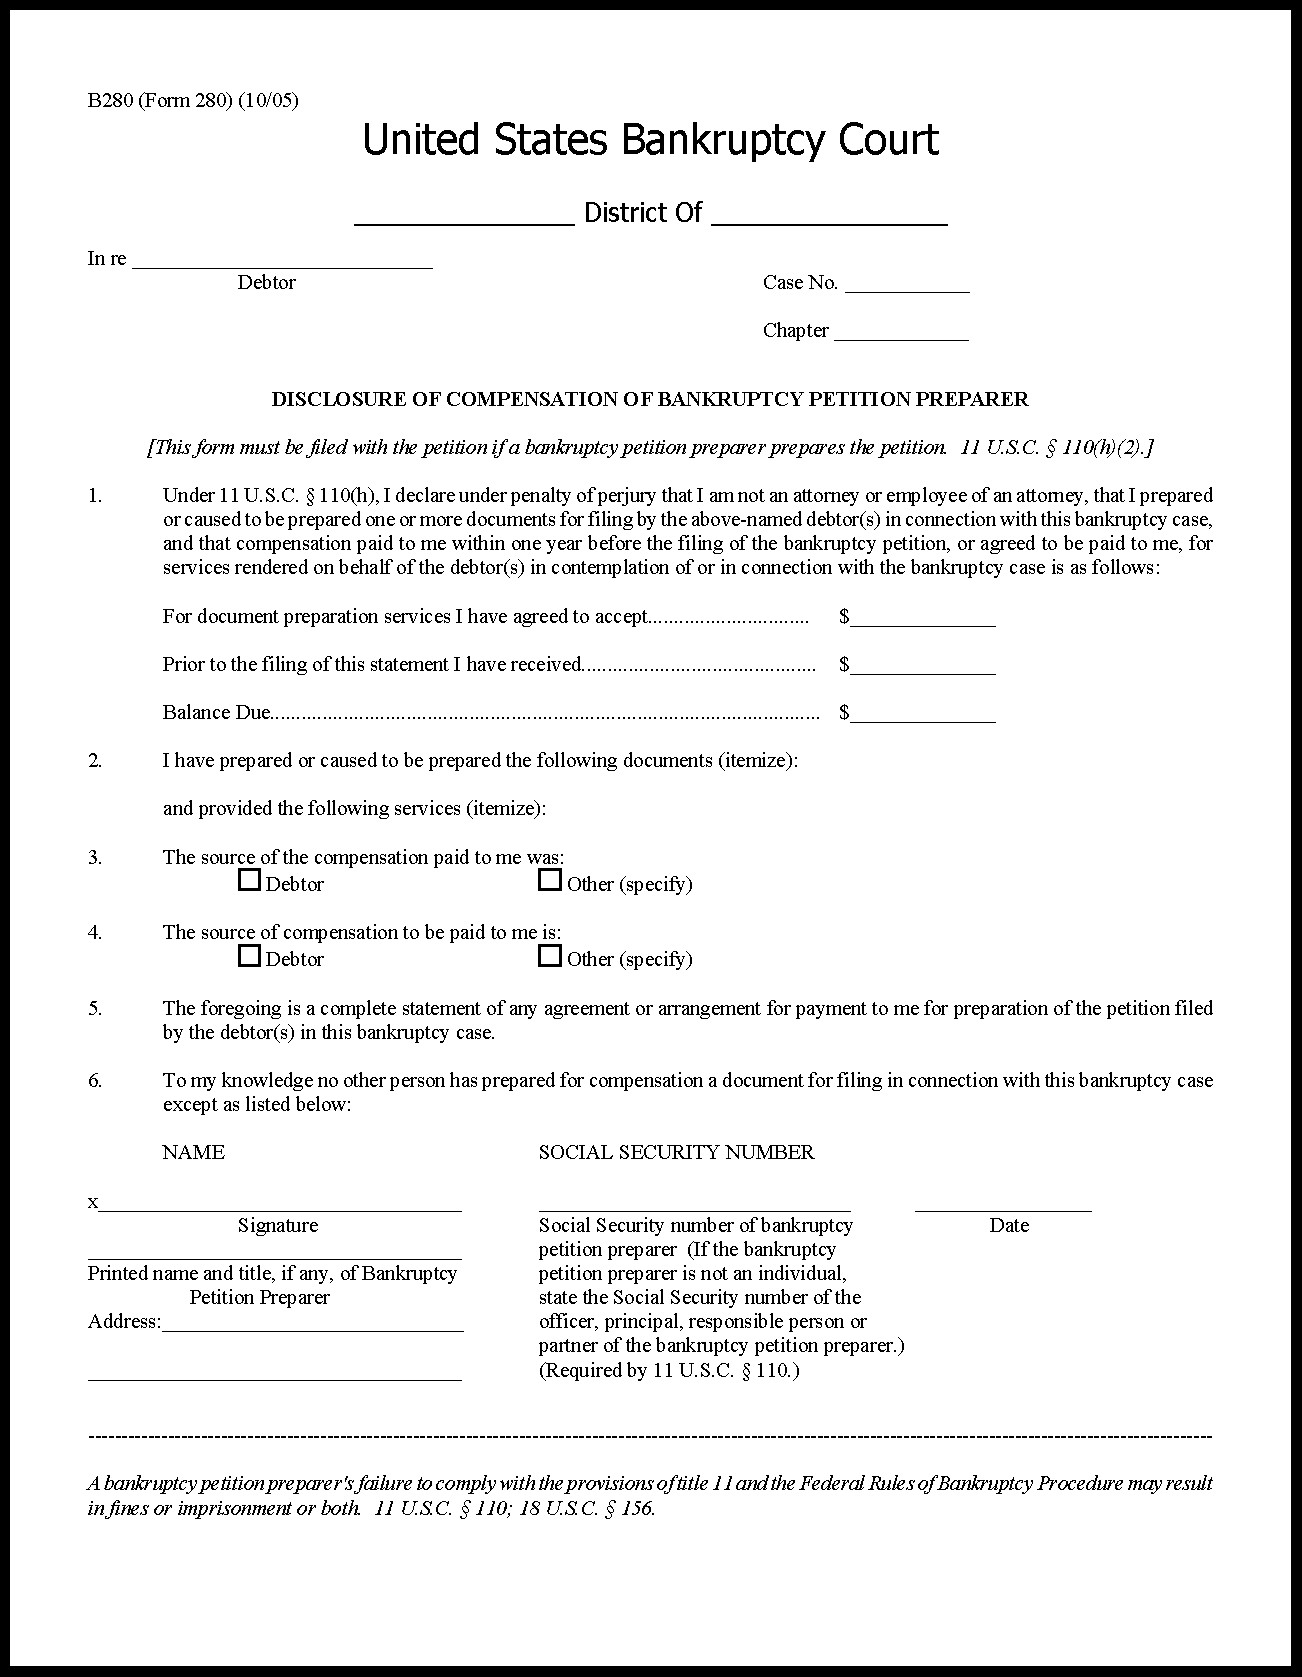 Bankruptcy Petition Form Bank 1